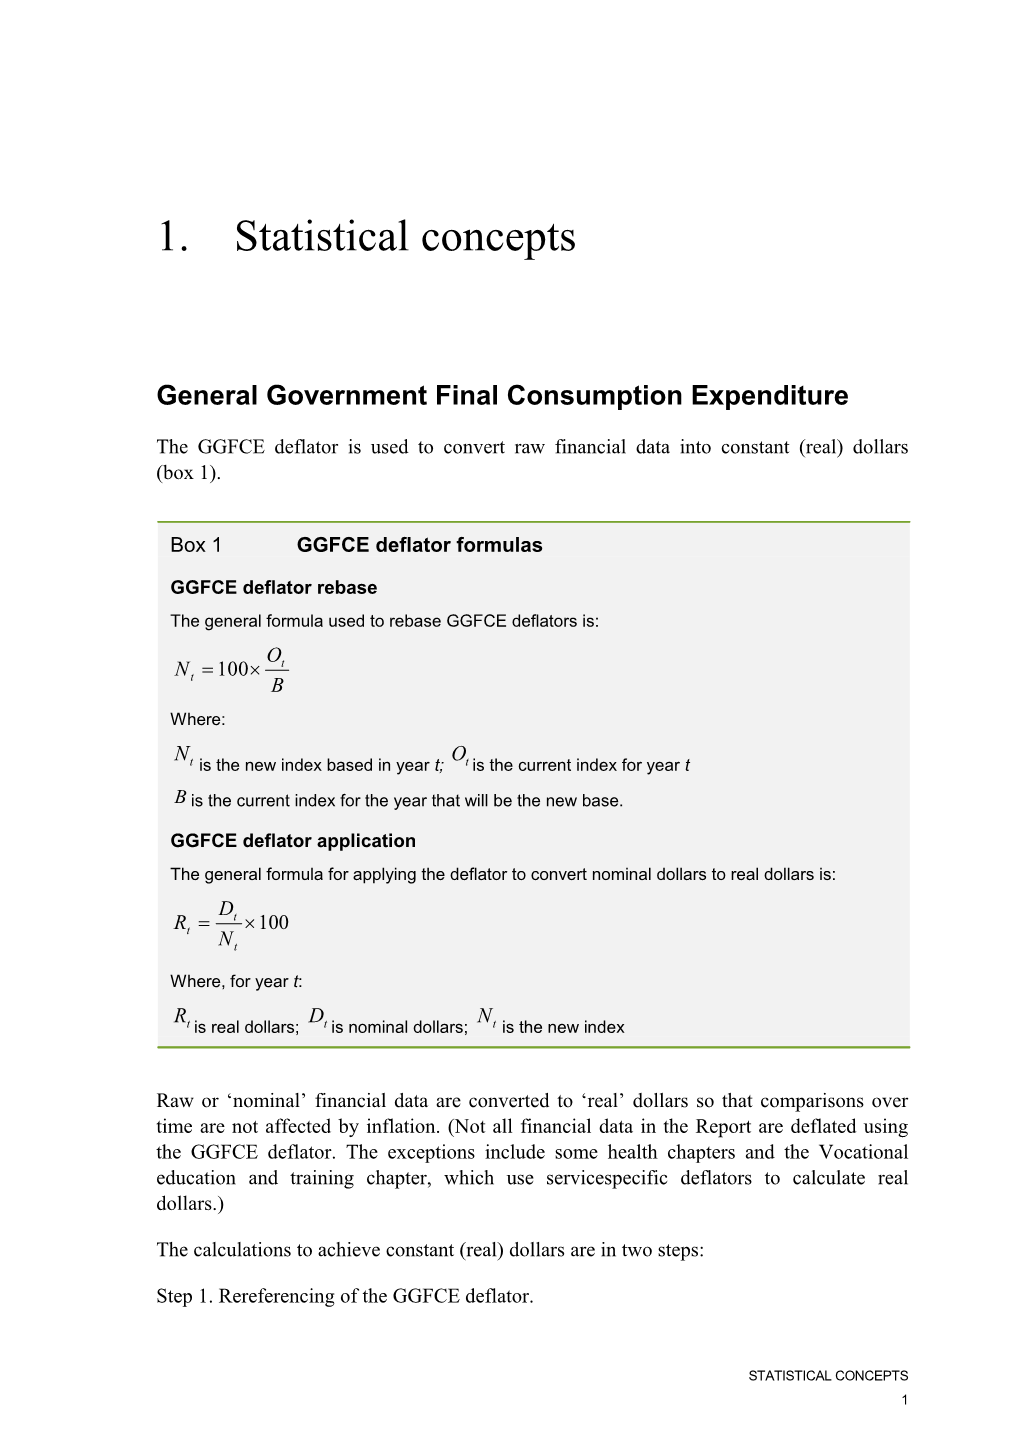 General Government Final Consumption Expenditure